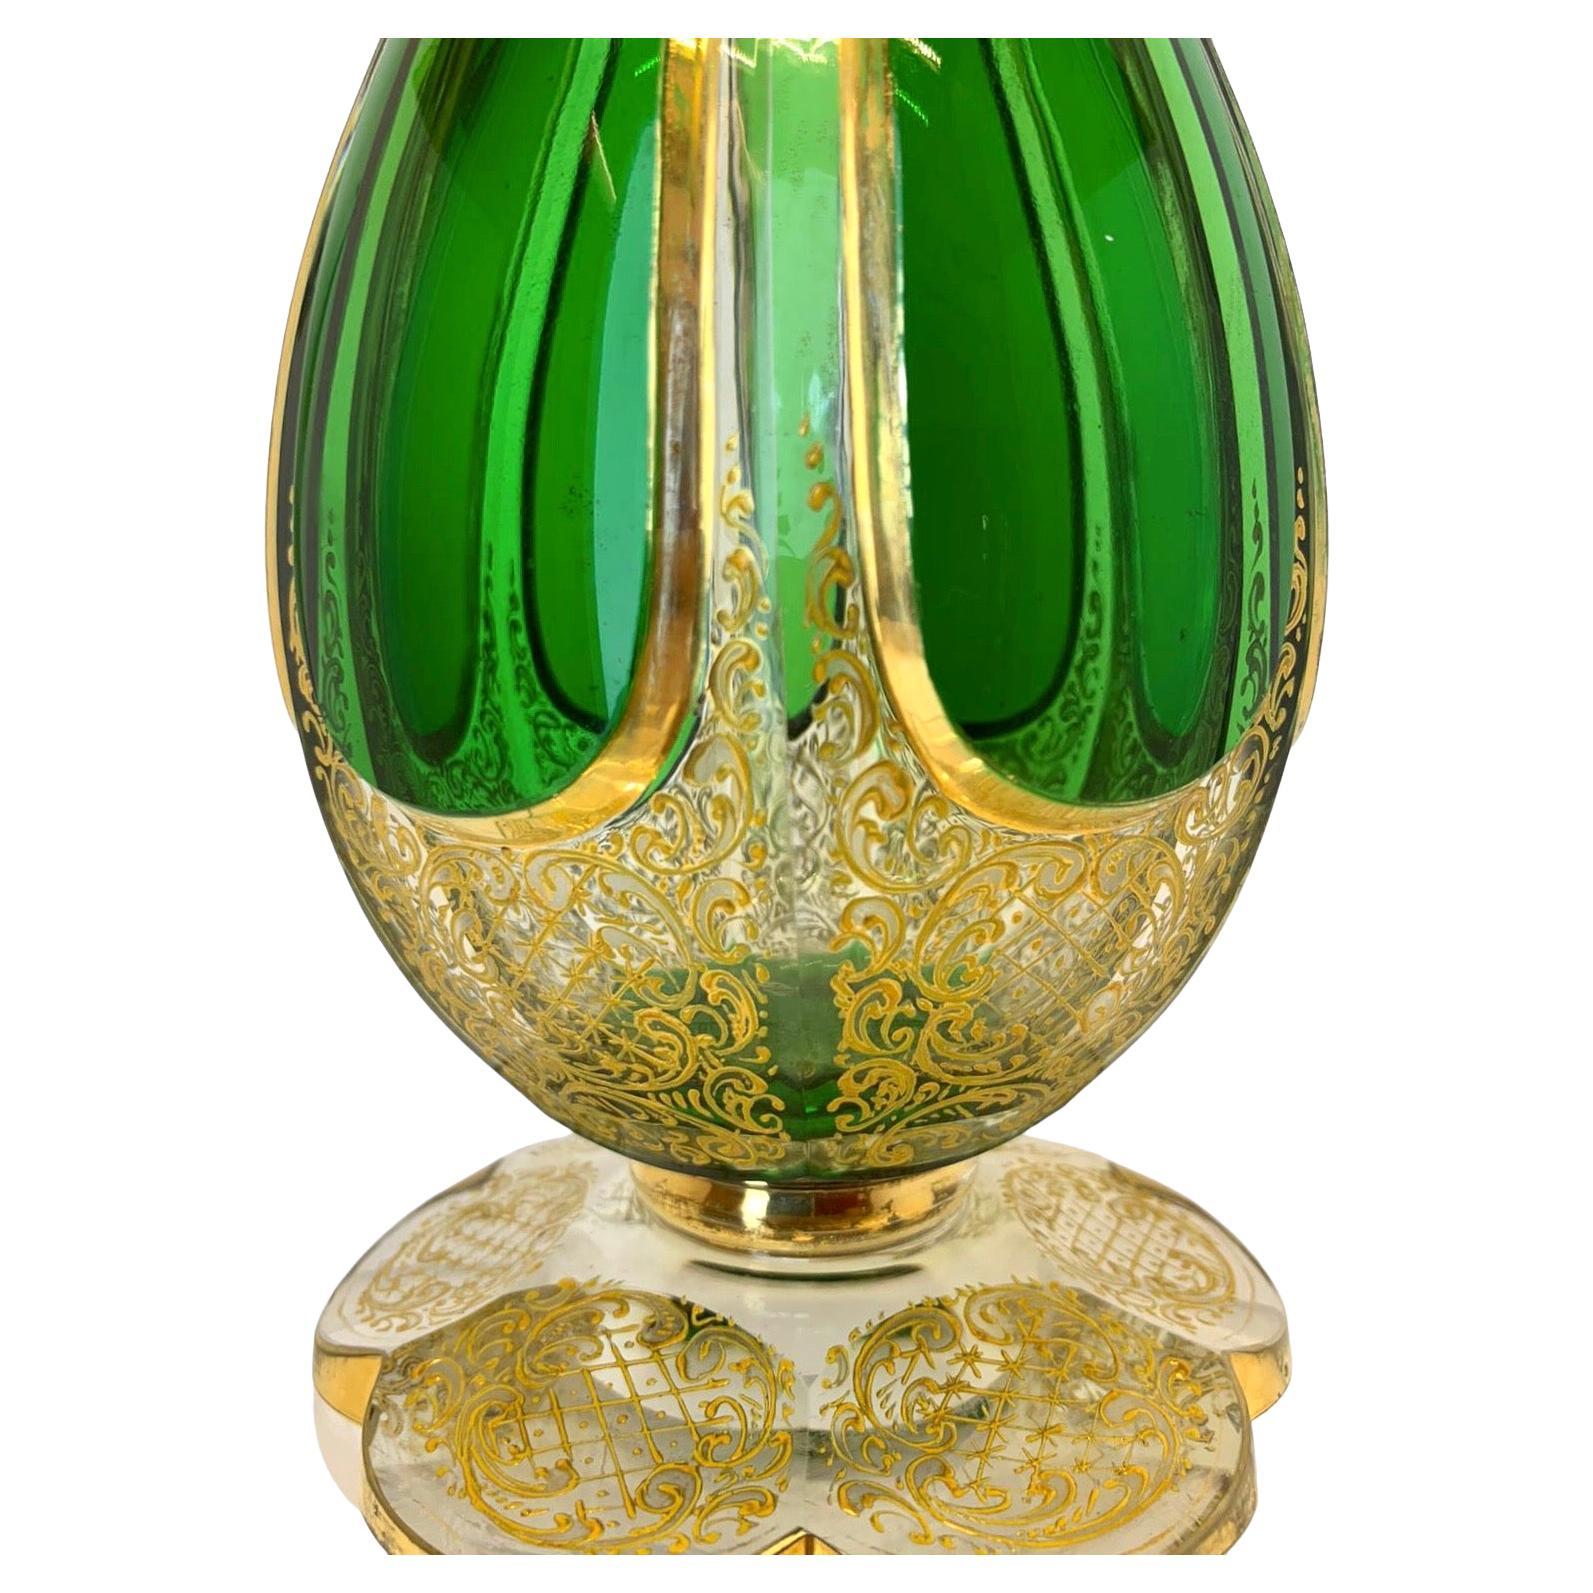 Antique Bohemian Moser Overlay Gilded Glass Decanter, 19th Century, 40 cm In Excellent Condition For Sale In Rostock, MV